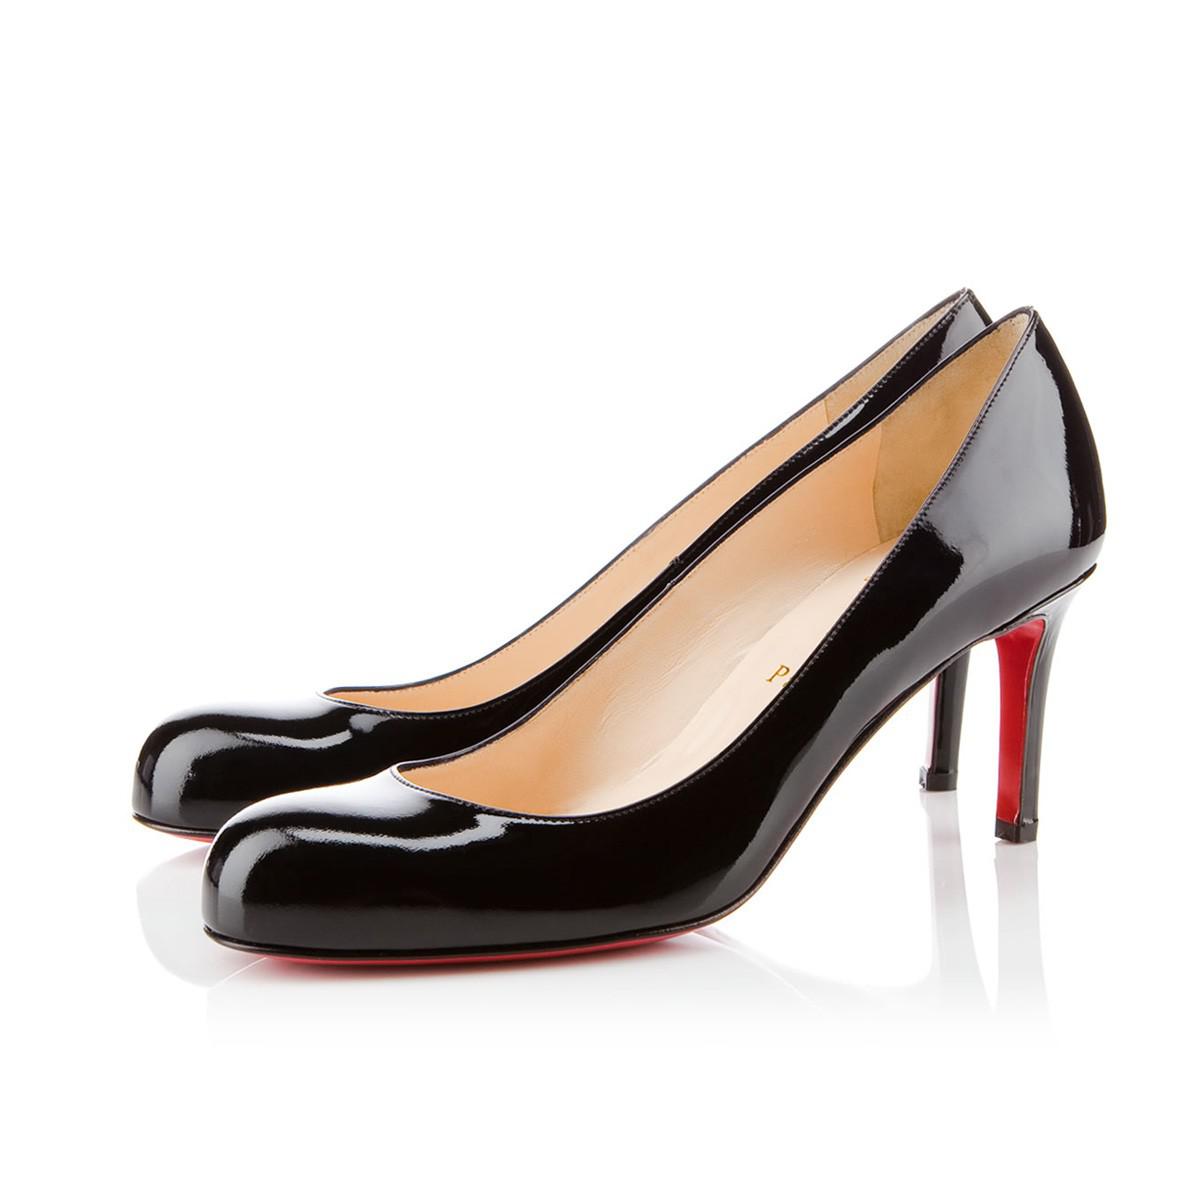 Christian Louboutin Simple Pump Patent in Black - Lyst